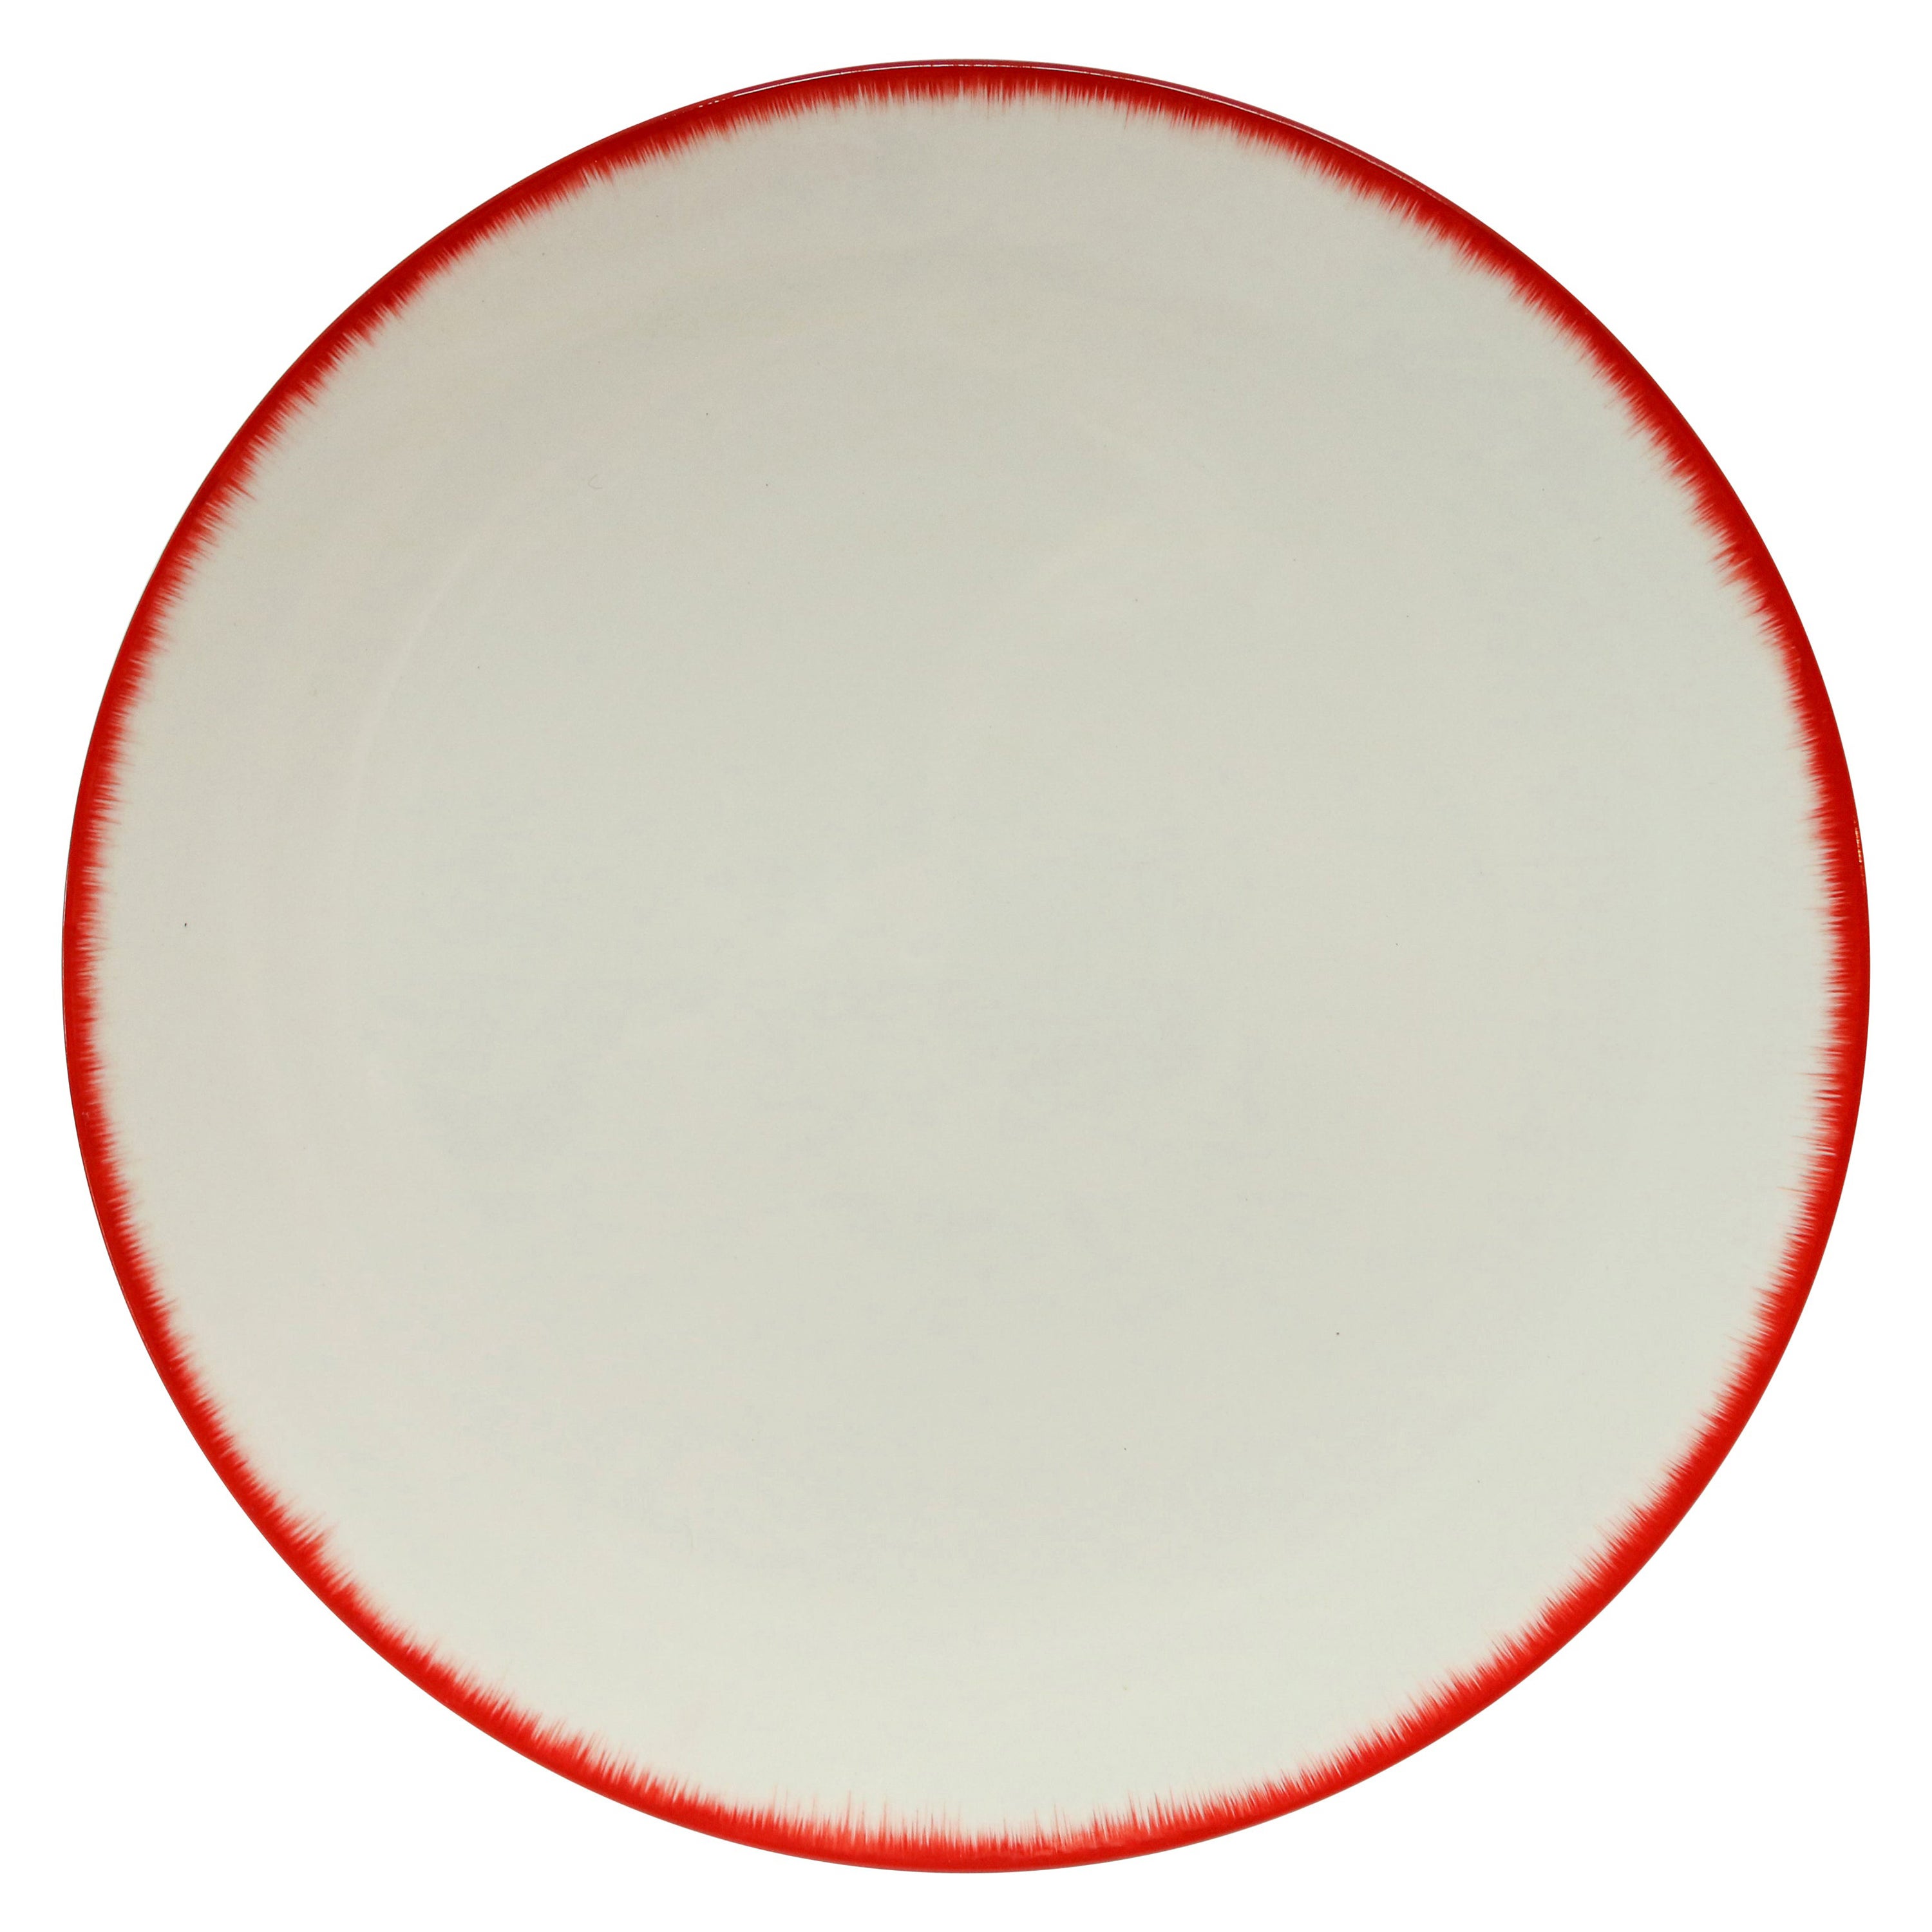 Ann Demeulemeester for Serax Dé Dinner Plate / Charger in off White / Red Rim